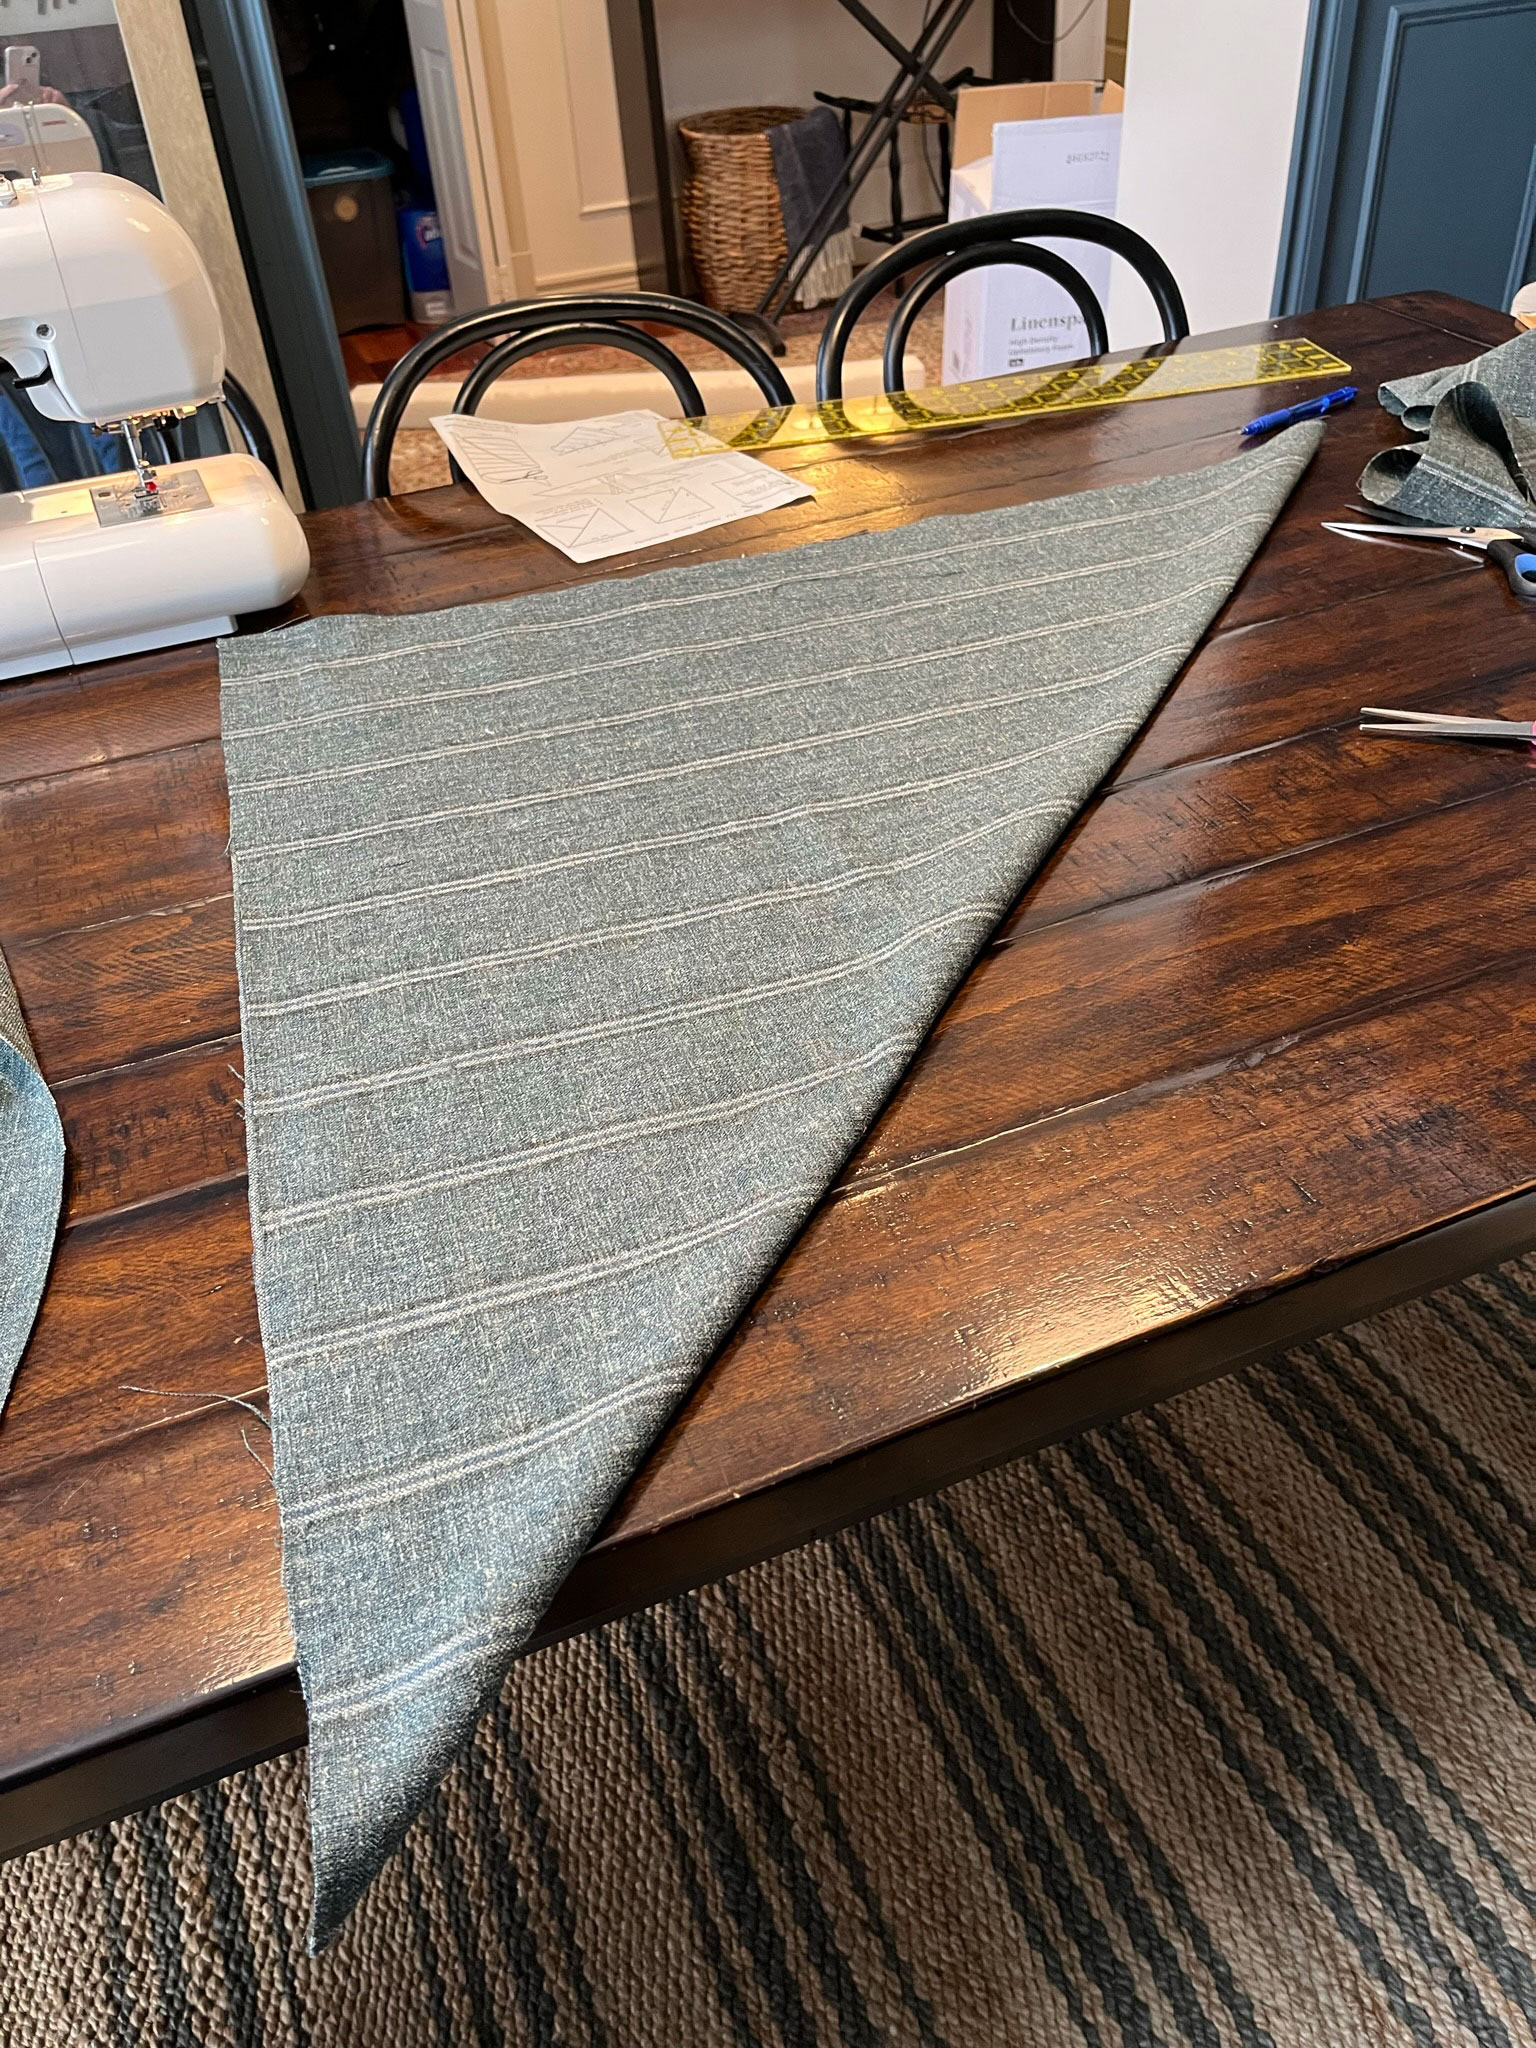 square of fabric folded diagonally to form a triangle